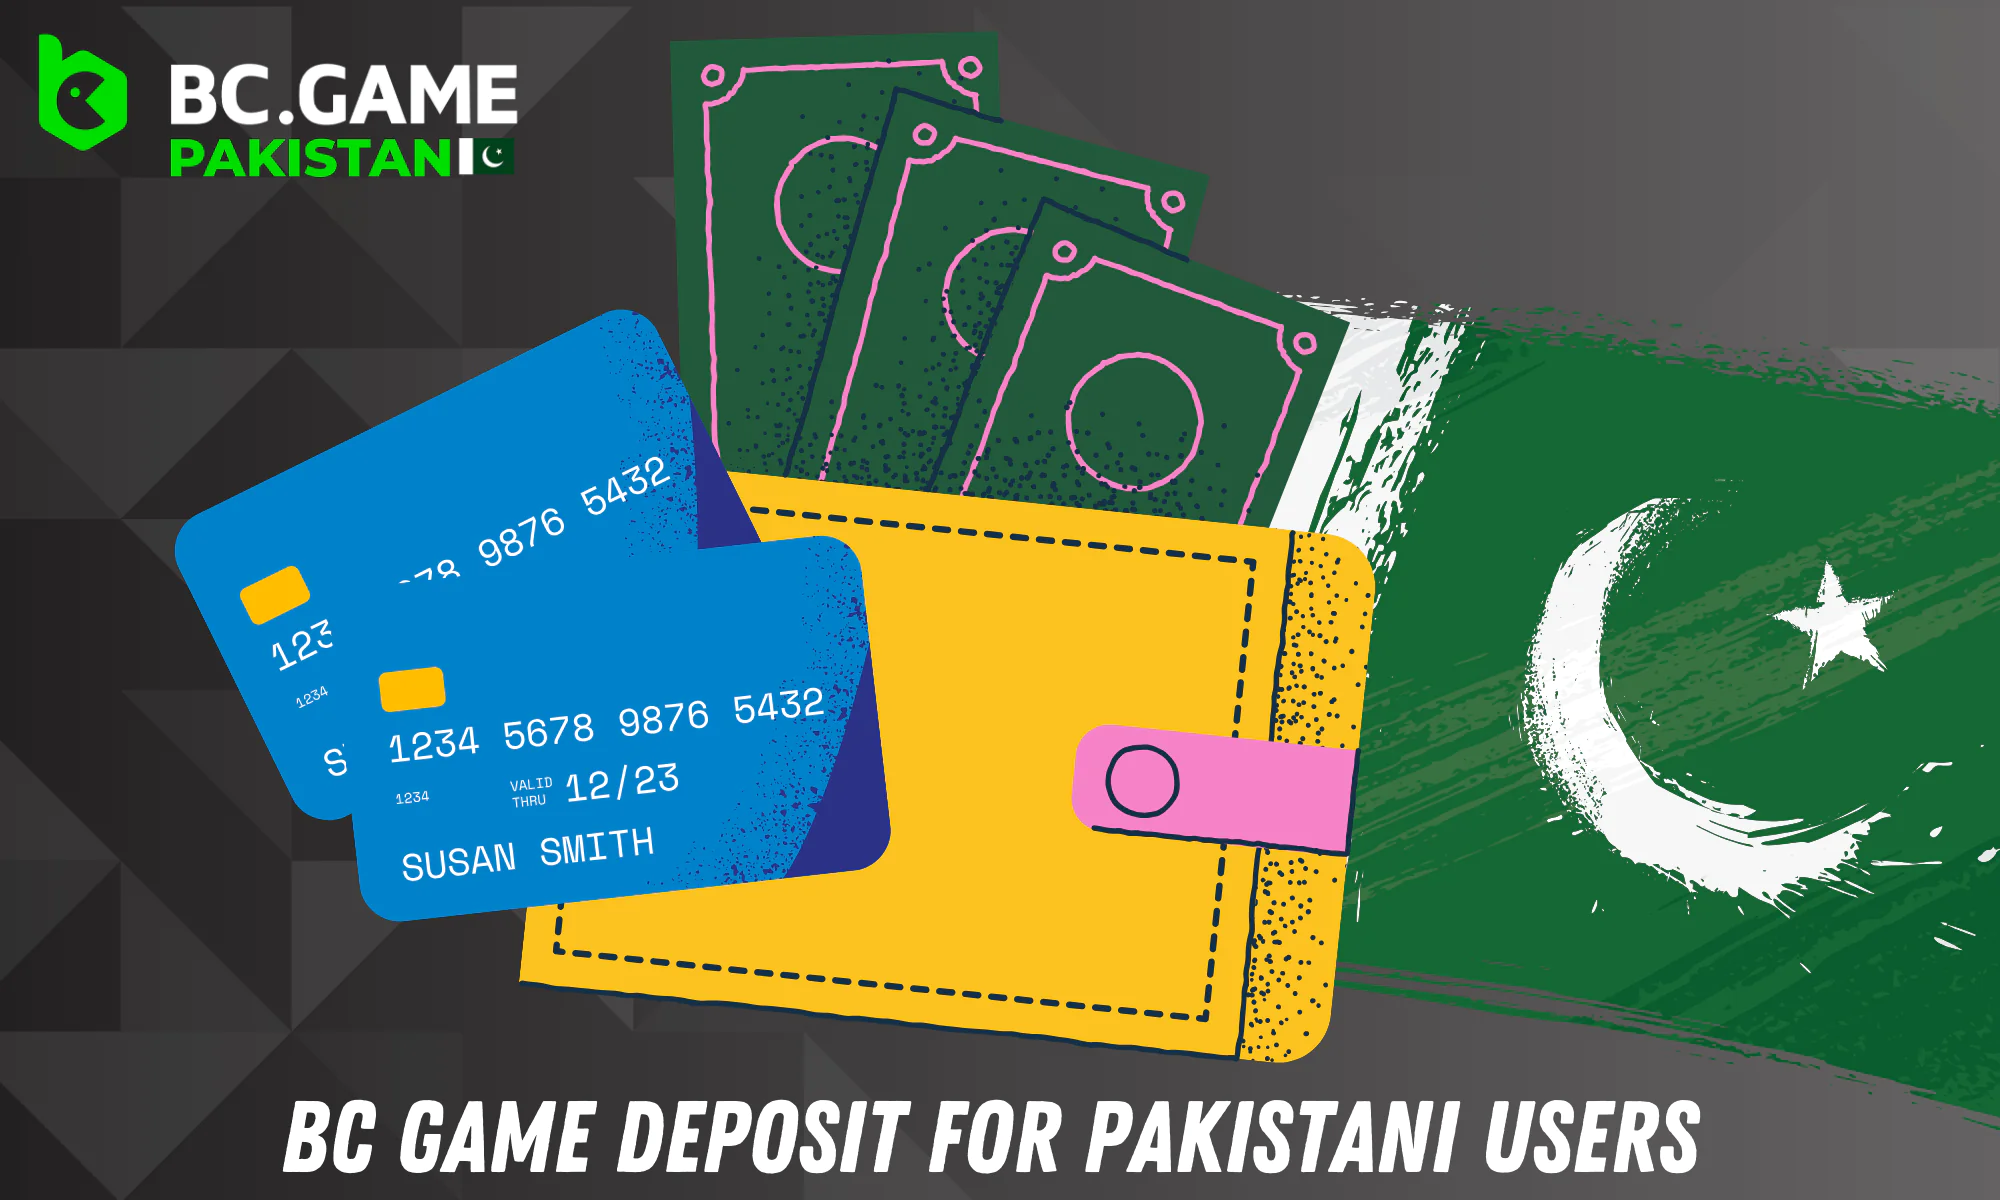 The BC Game website offers global and local payment systems for players from Pakistan